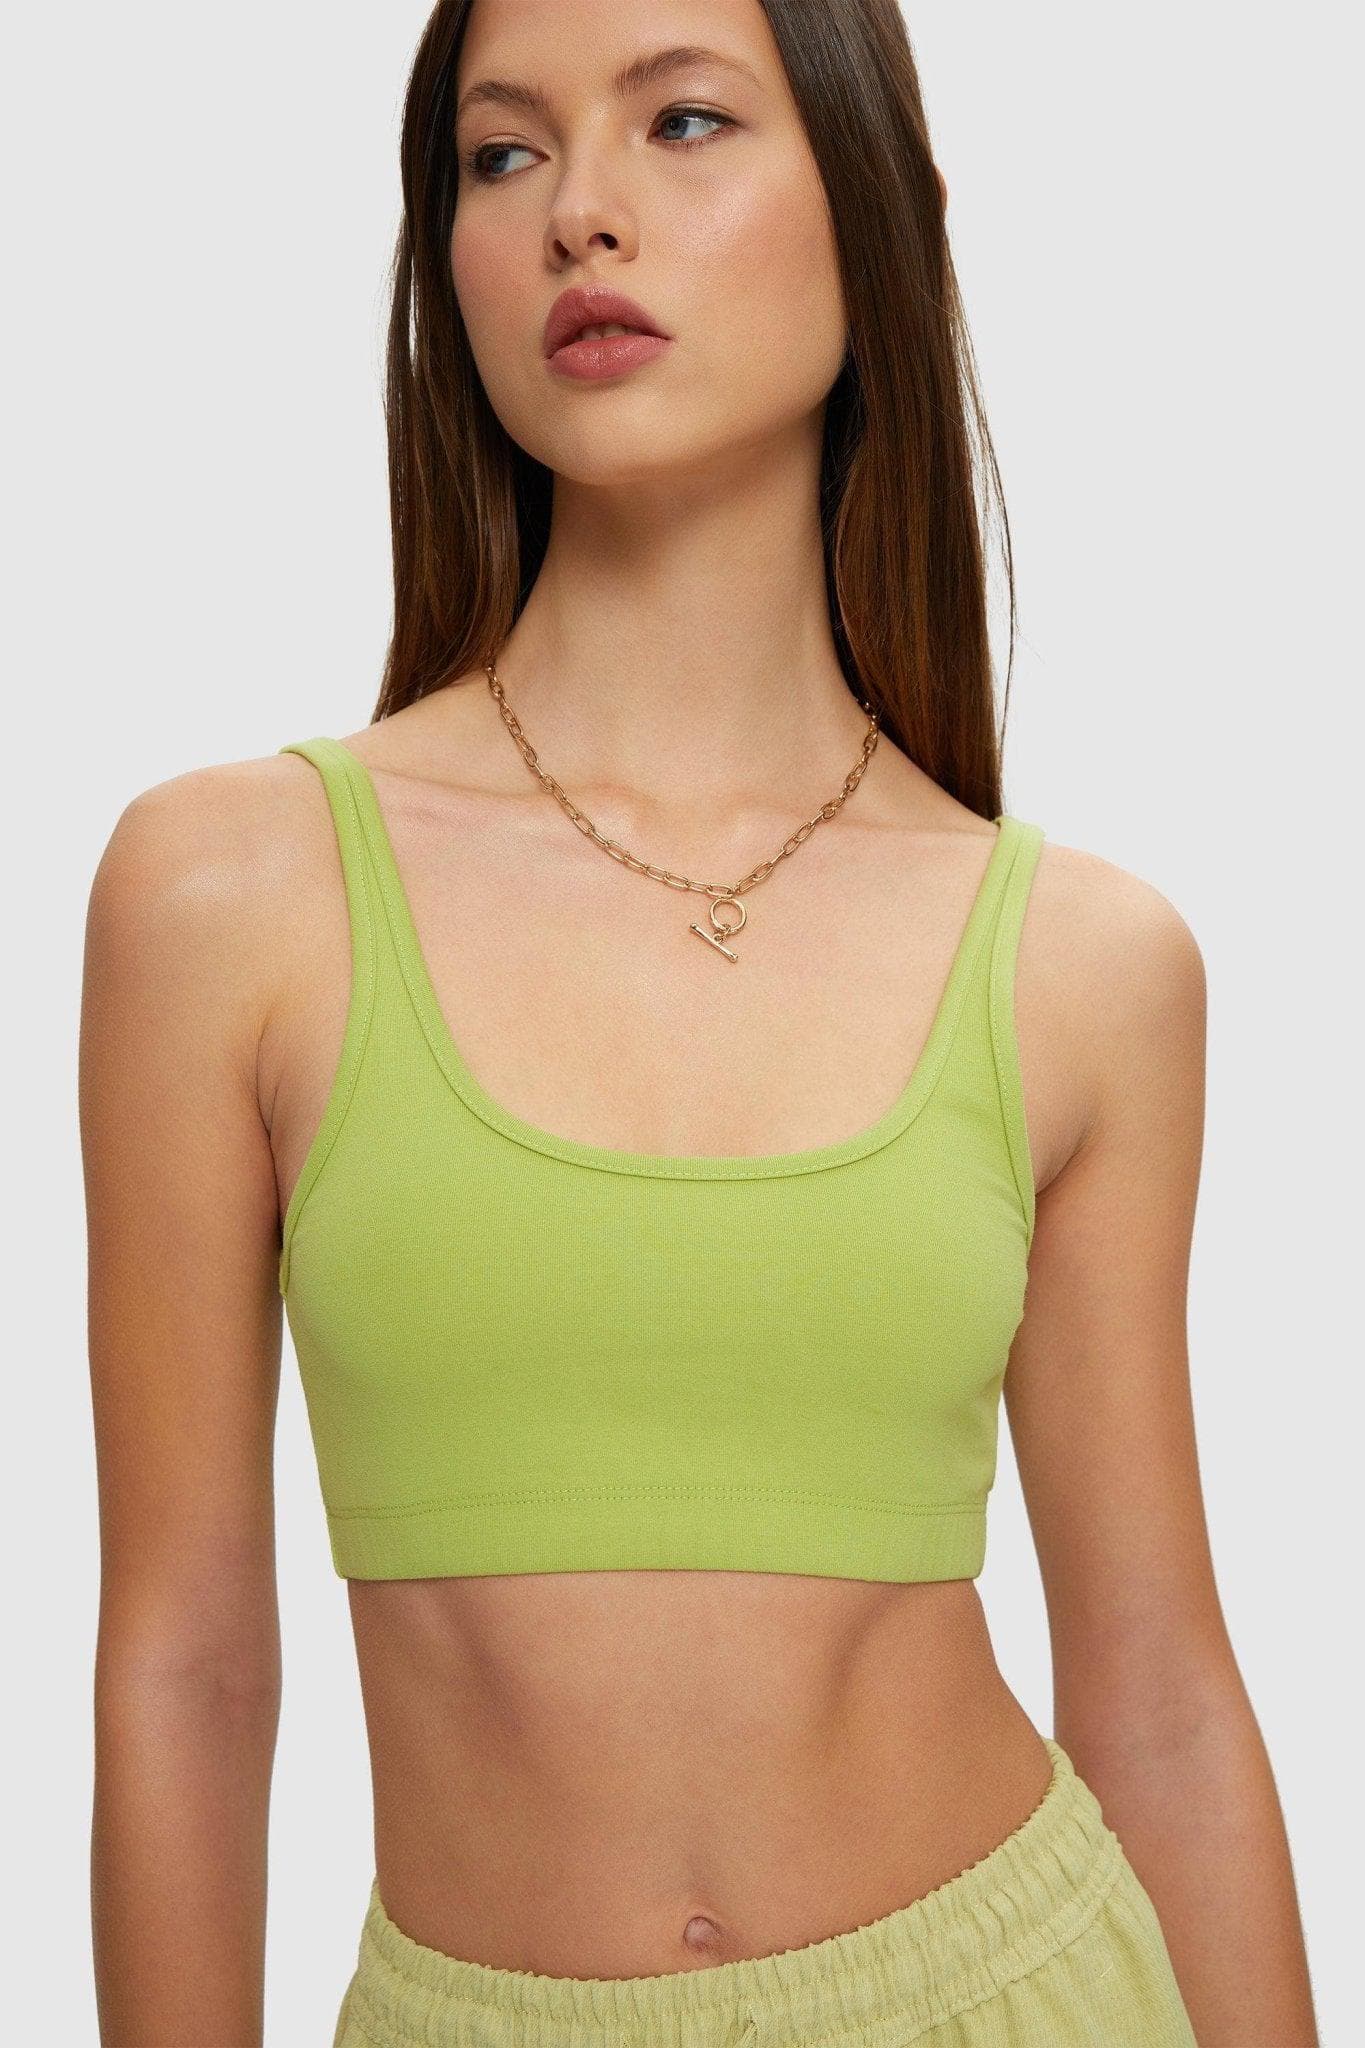 Buy Tank Top / Sleevless Blouse / Boat Neck Top / Wide Straps Top /  Causal&formal Top / Stylish Tank Top / IVANEL / 28 Colors, S, M, L, XL, XXL  Online in India 